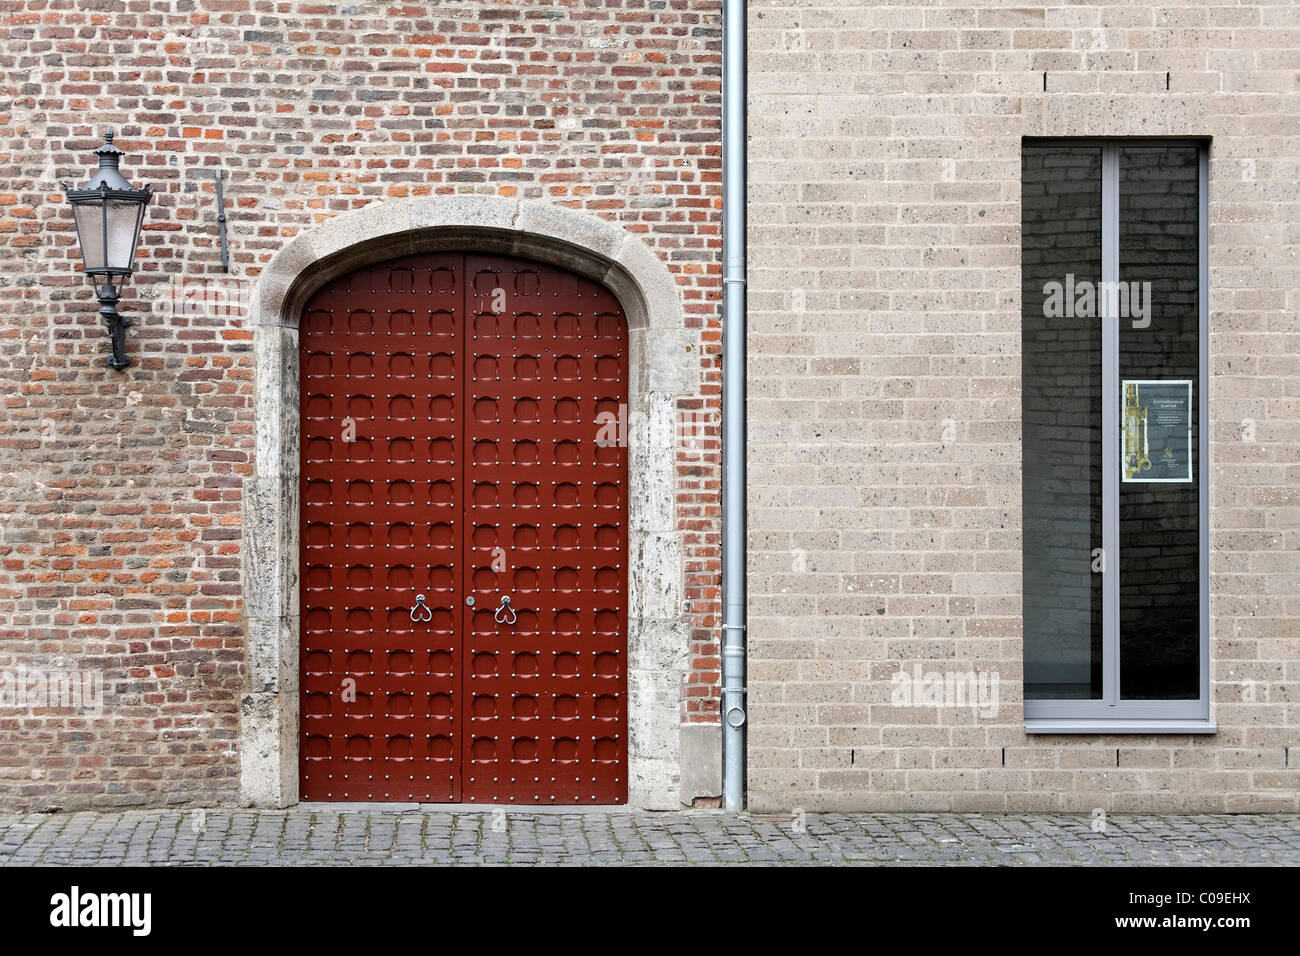 Medieval brick wall with gate side by side with a new wall with modern windows, Stiftsmuseum monastery museum, Xanten Stock Photo